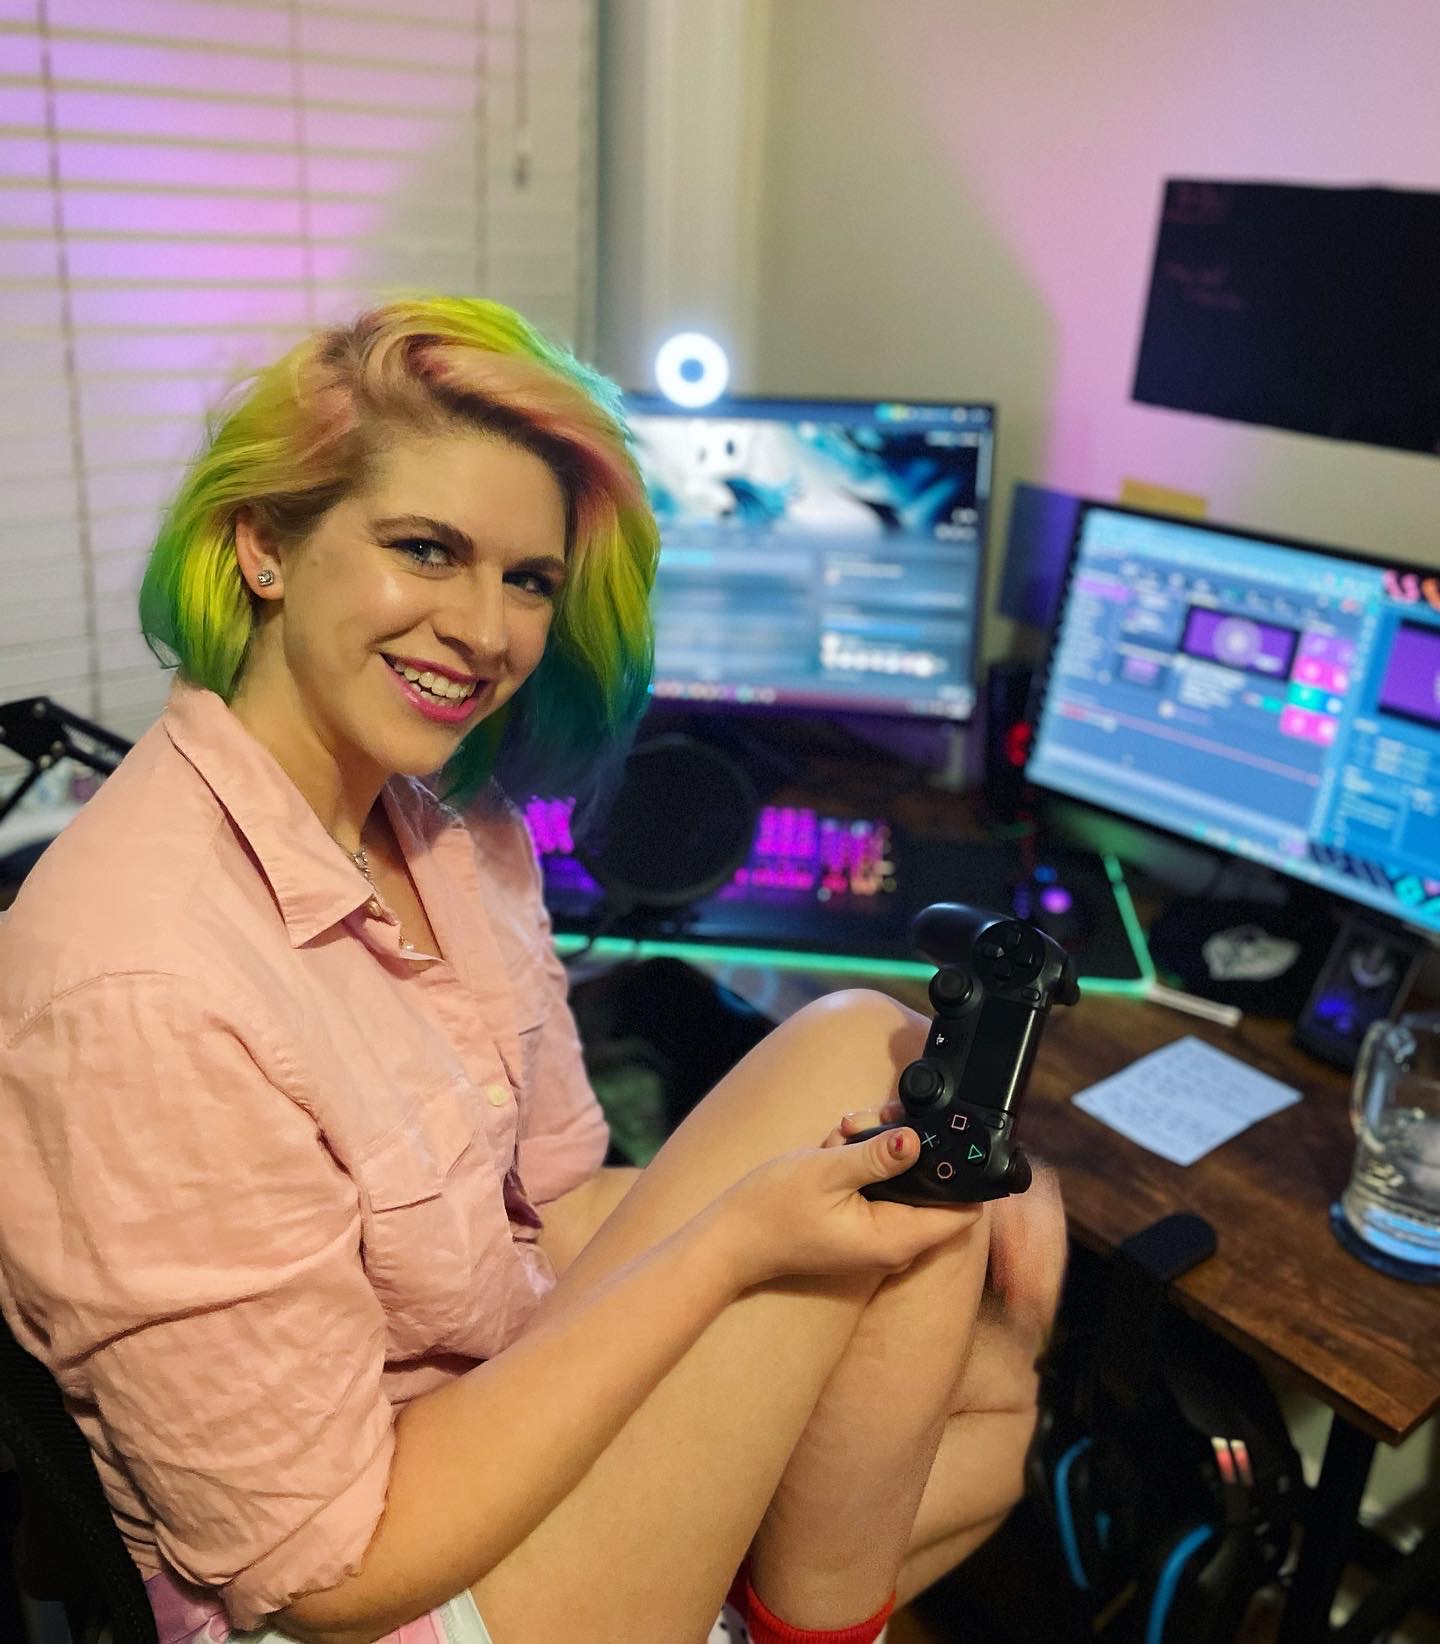 Girl with rainbow colored short hair sitting in a desk chair in front of two computer monitors, wearing a pink long sleeve shirt, holding a PlayStation controller and smiling at the camera